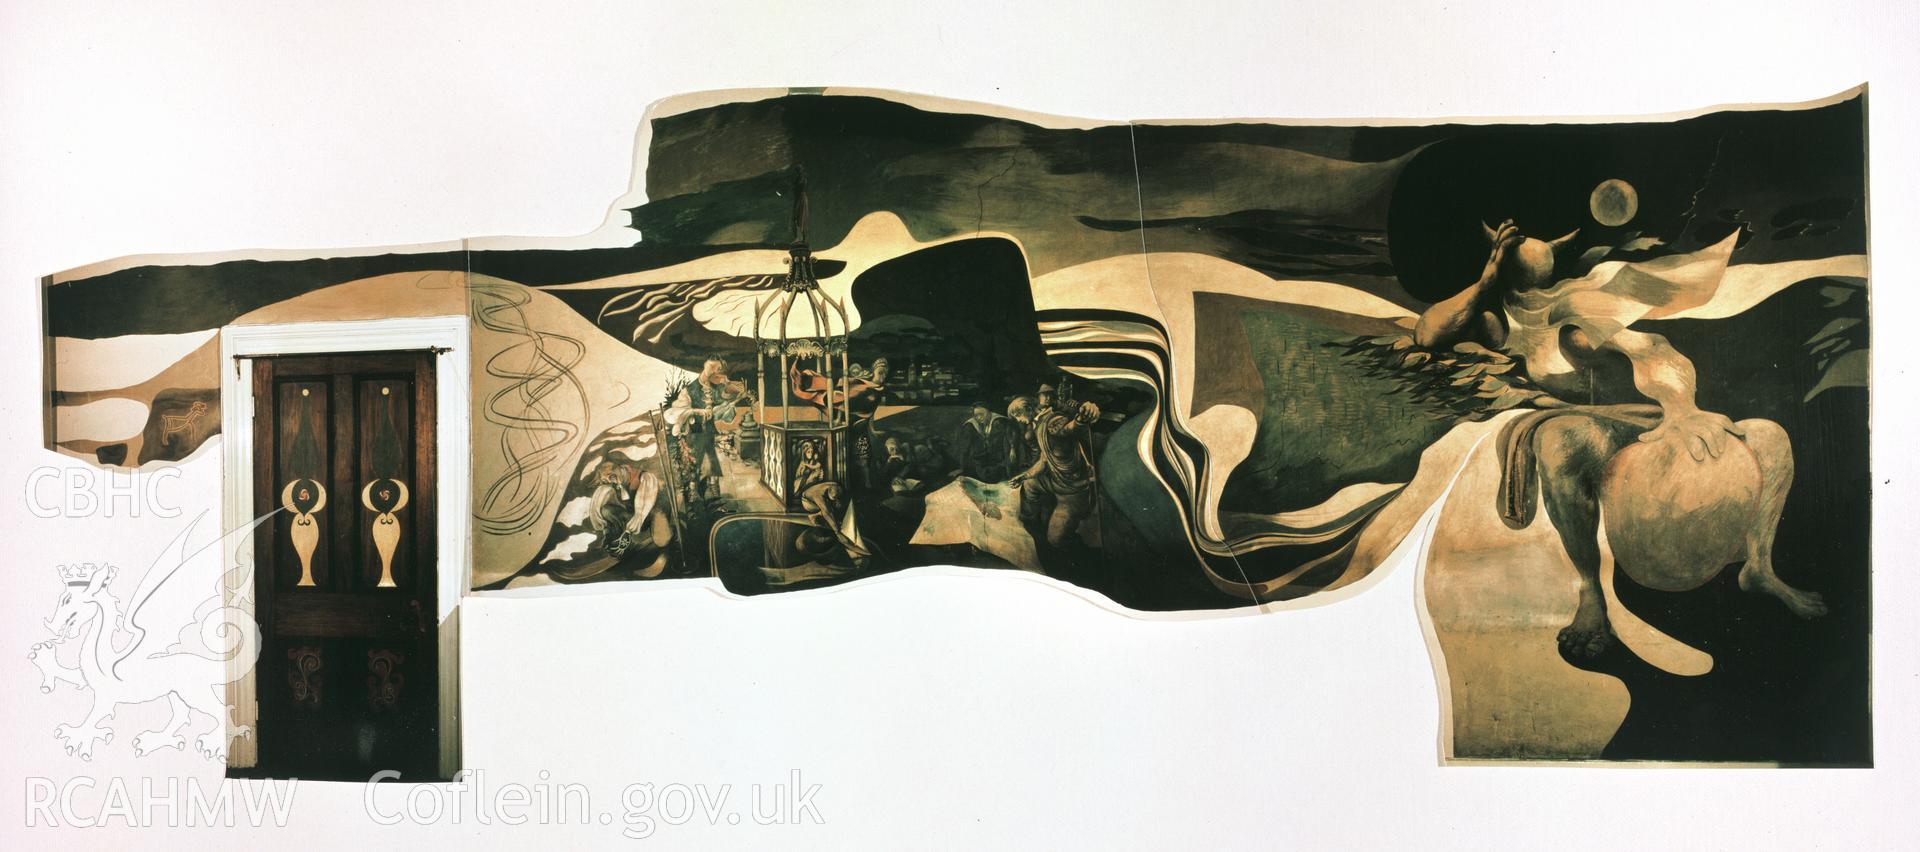 RCAHMW colour transparency showing the Ceri Richards mural at British Council Office, Cardiff. Dated 1950.